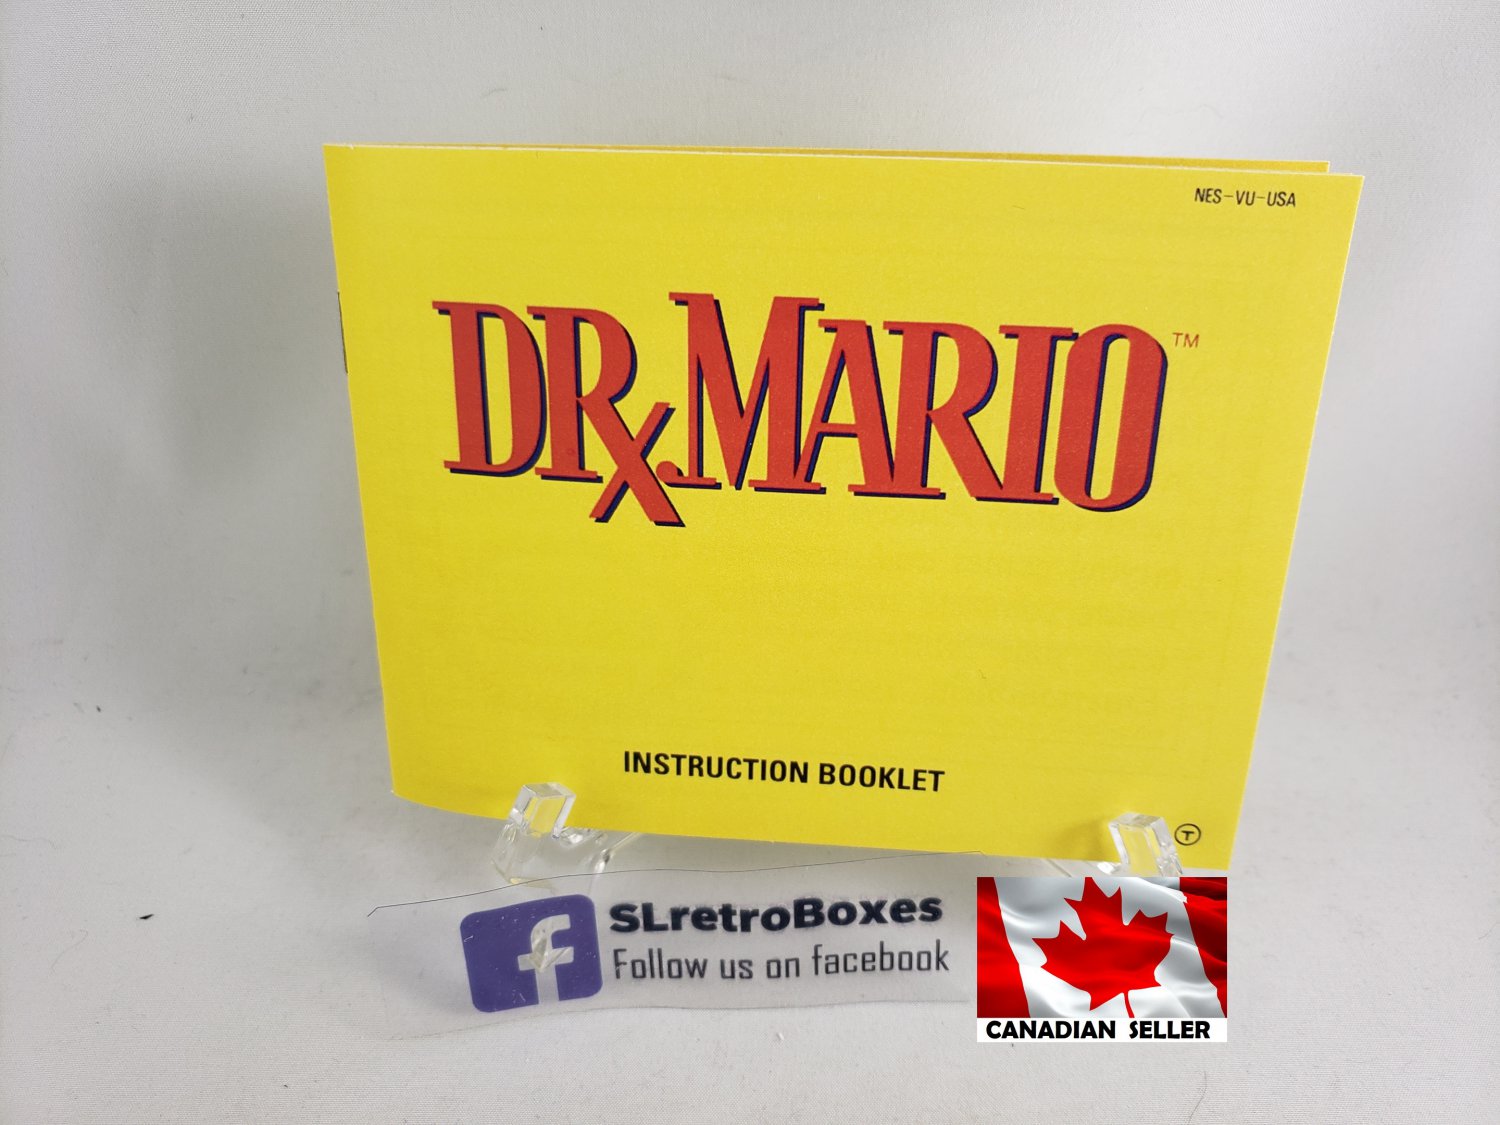 MANUAL NES - DR. MARIO - Nintendo Replacement Instruction Manual Booklet